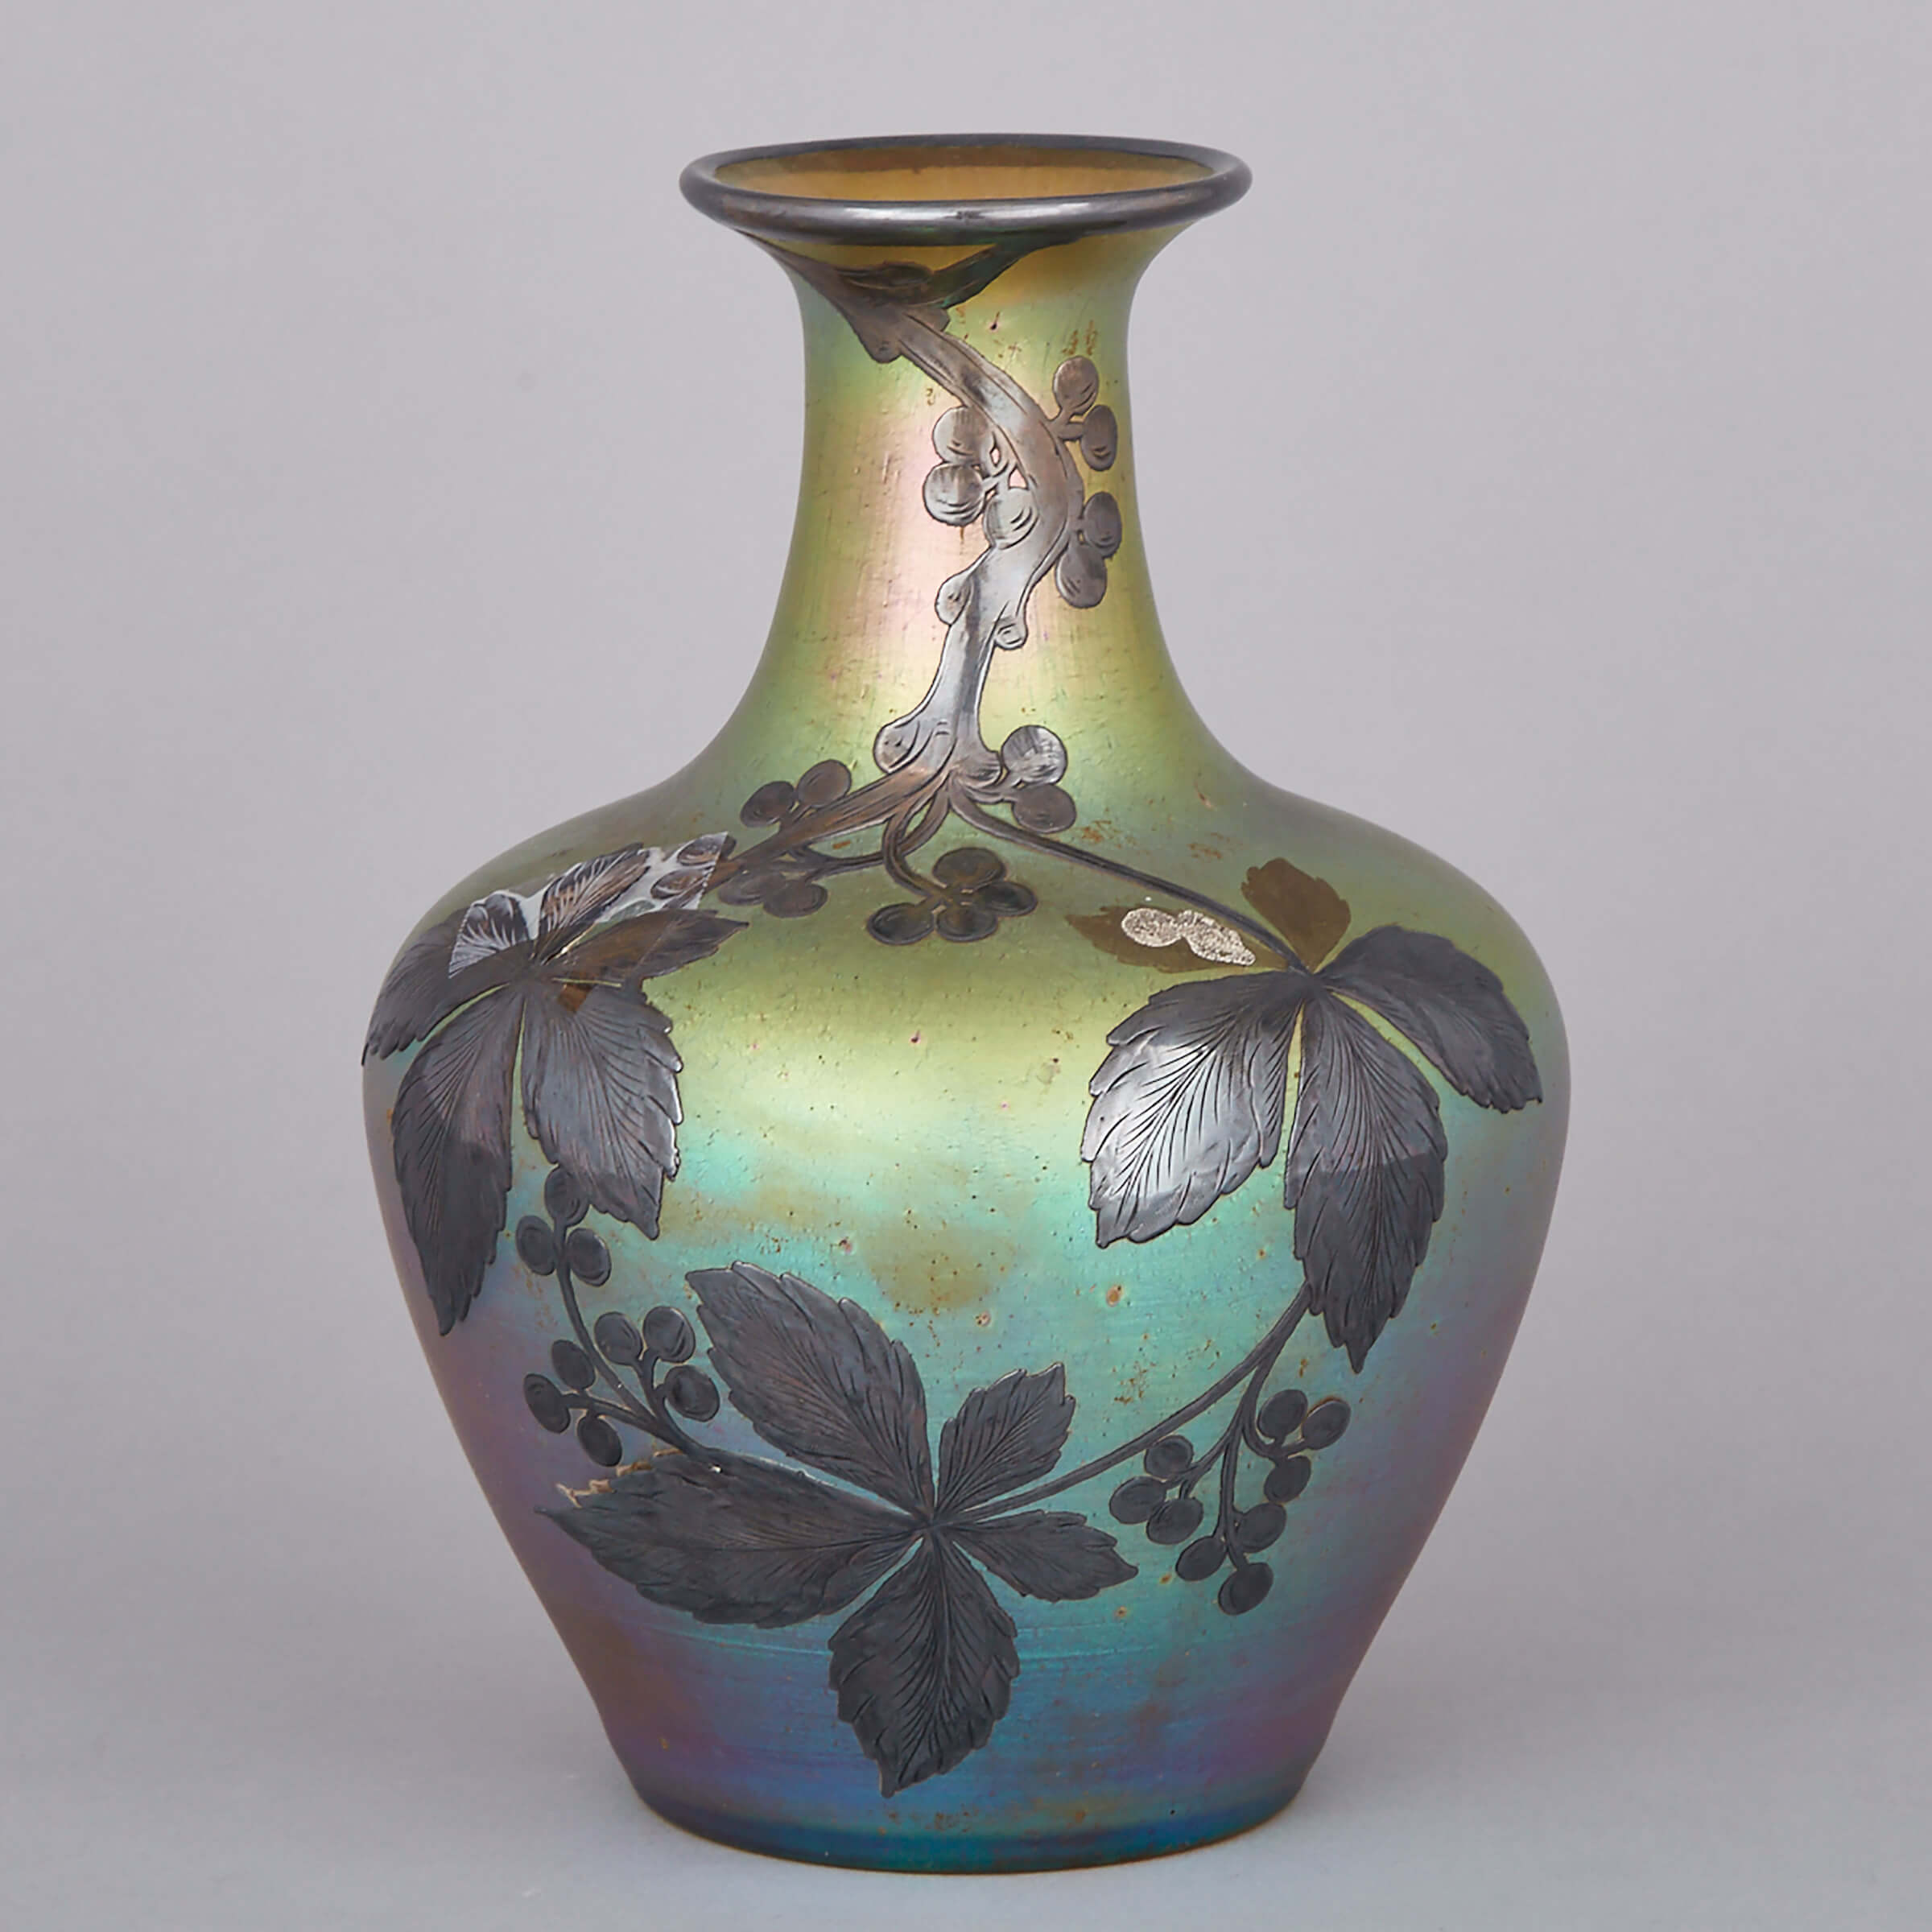 American Engraved Silver Overlaid Iridescent Glass Vase, early 20th century